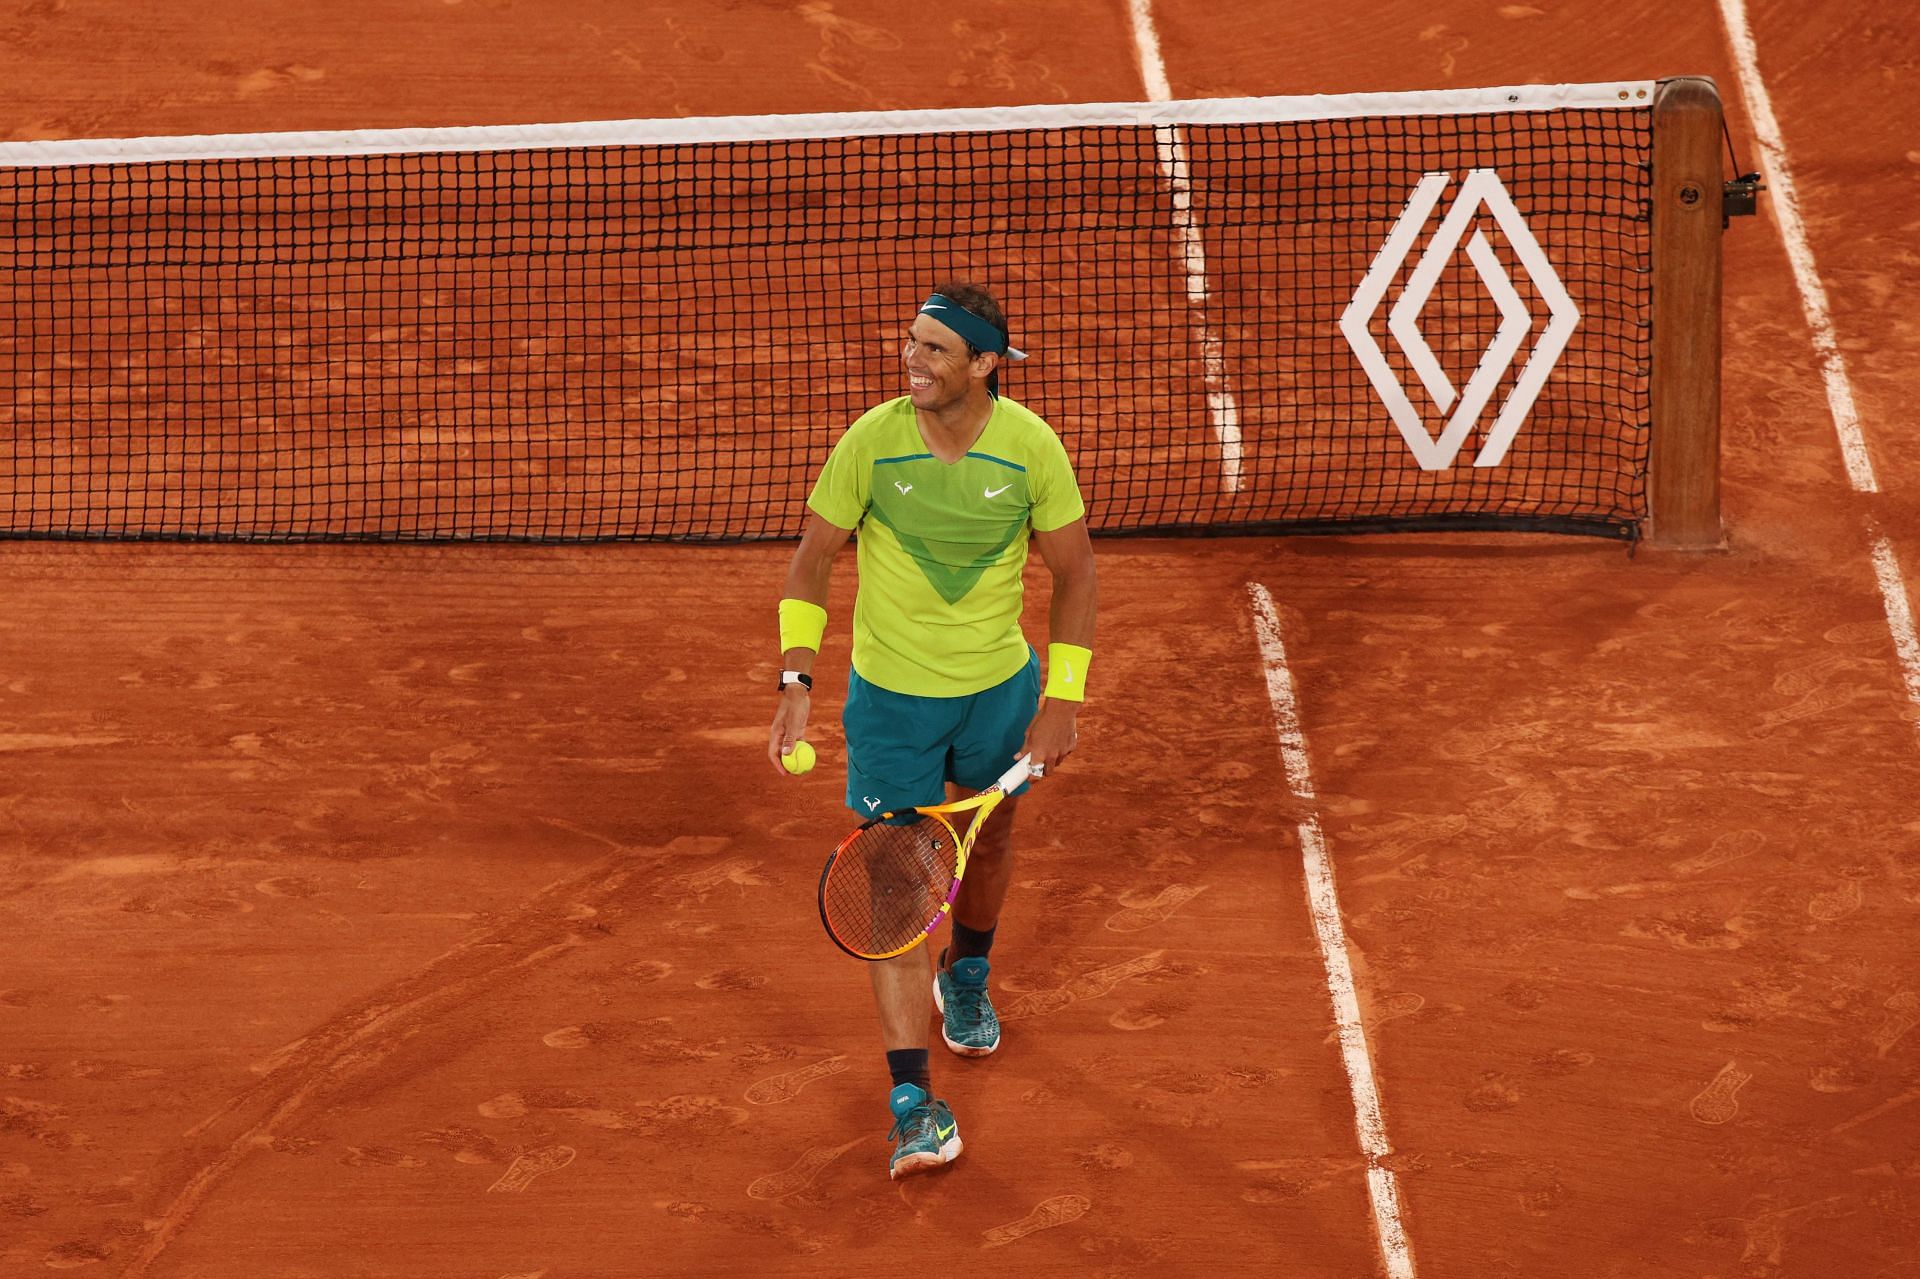 Rafael Nadal will take on Alexander Zverev in the semifinals of the French Open.